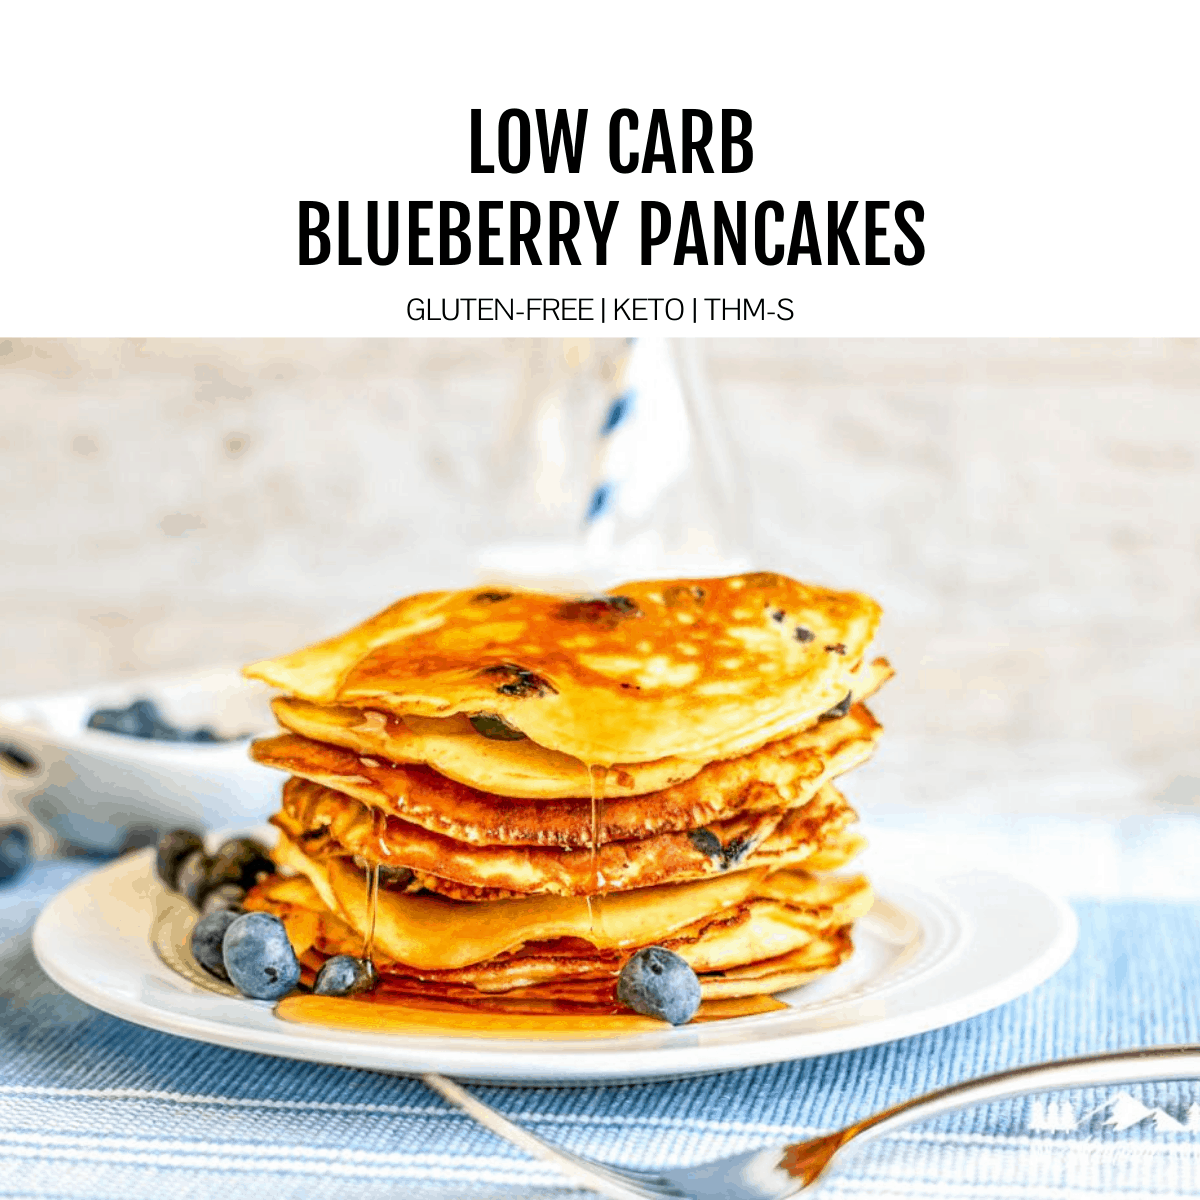 low carb blueberry pancakes featured image